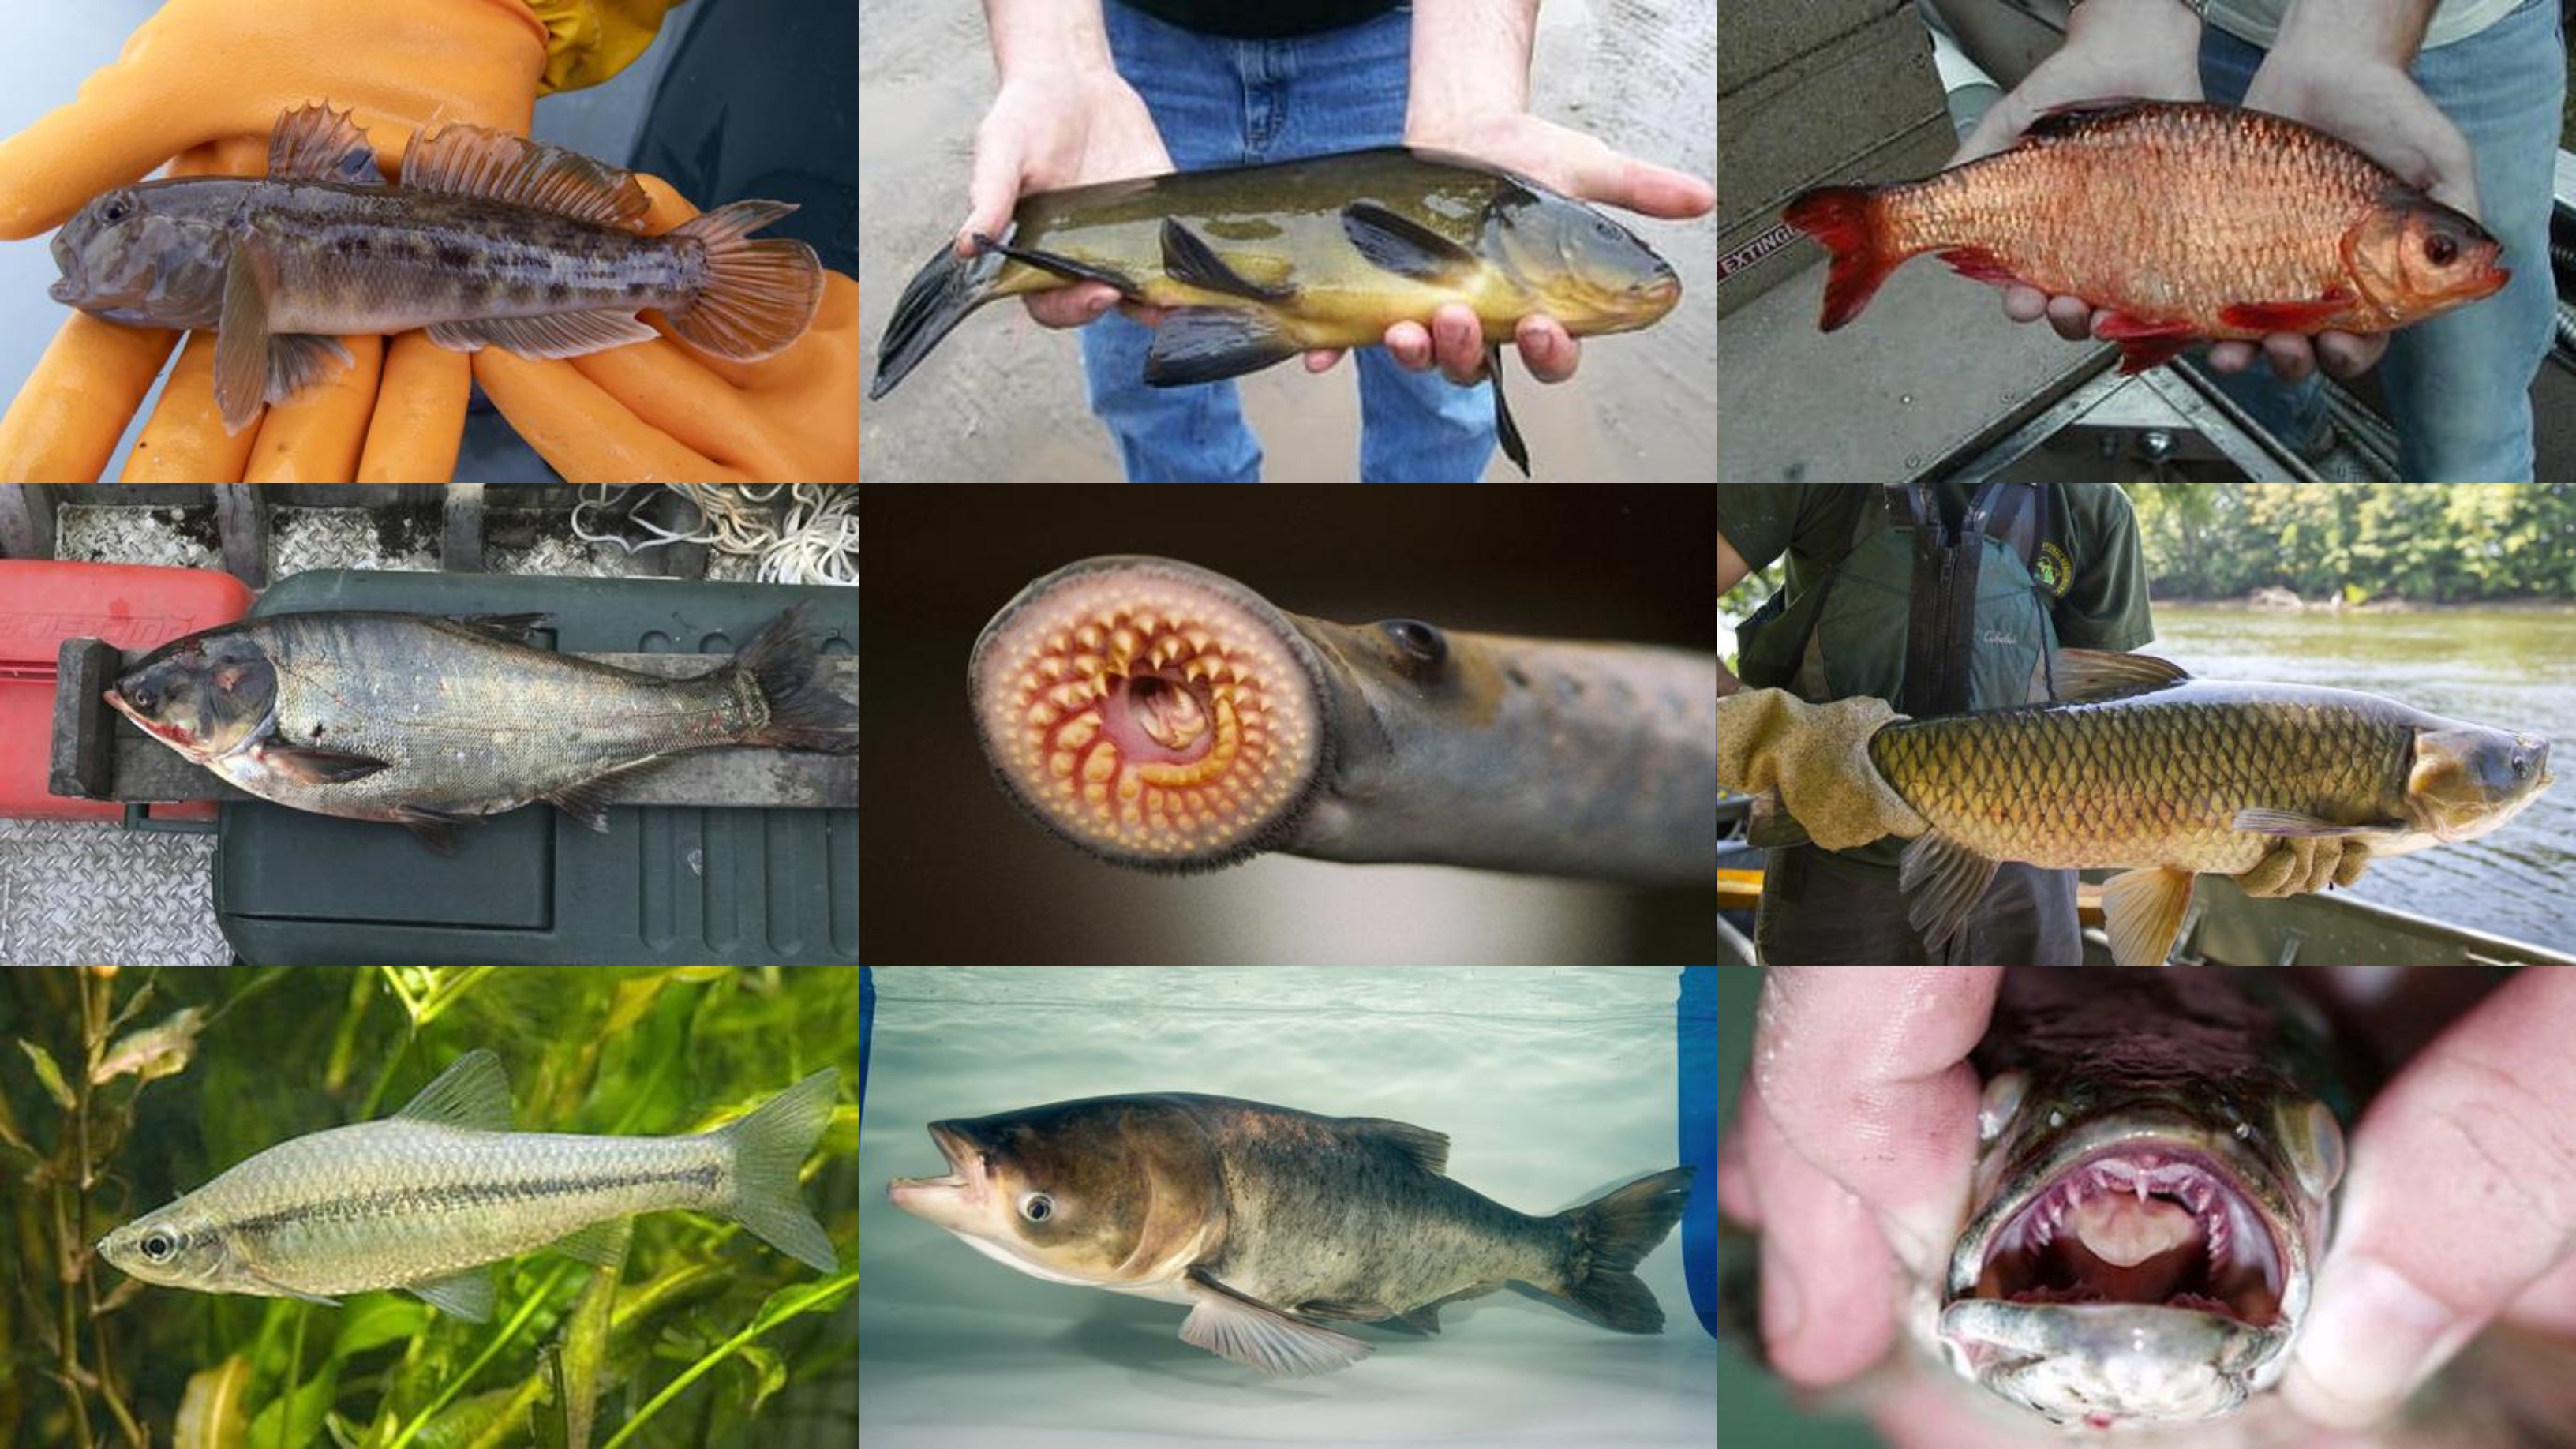 Meet the 17 invasive fish Michigan residents should know about